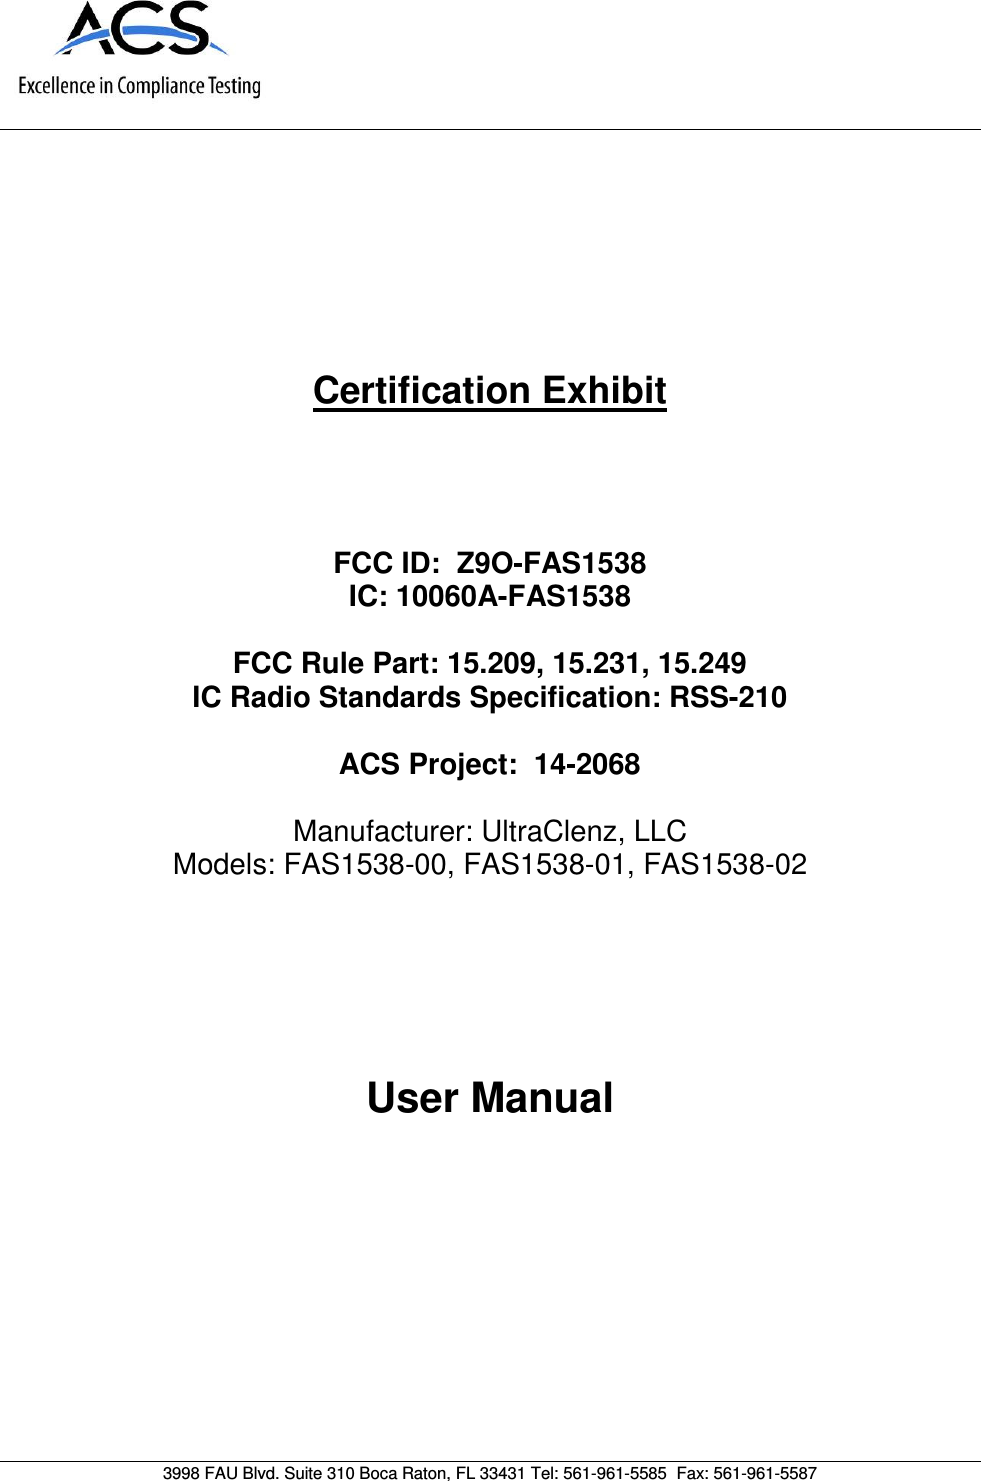      Certification Exhibit     FCC ID:  Z9O-FAS1538 IC: 10060A-FAS1538  FCC Rule Part: 15.209, 15.231, 15.249 IC Radio Standards Specification: RSS-210  ACS Project:  14-2068   Manufacturer: UltraClenz, LLC Models: FAS1538-00, FAS1538-01, FAS1538-02     User Manual   3998 FAU Blvd. Suite 310 Boca Raton, FL 33431 Tel: 561-961-5585  Fax: 561-961-5587 